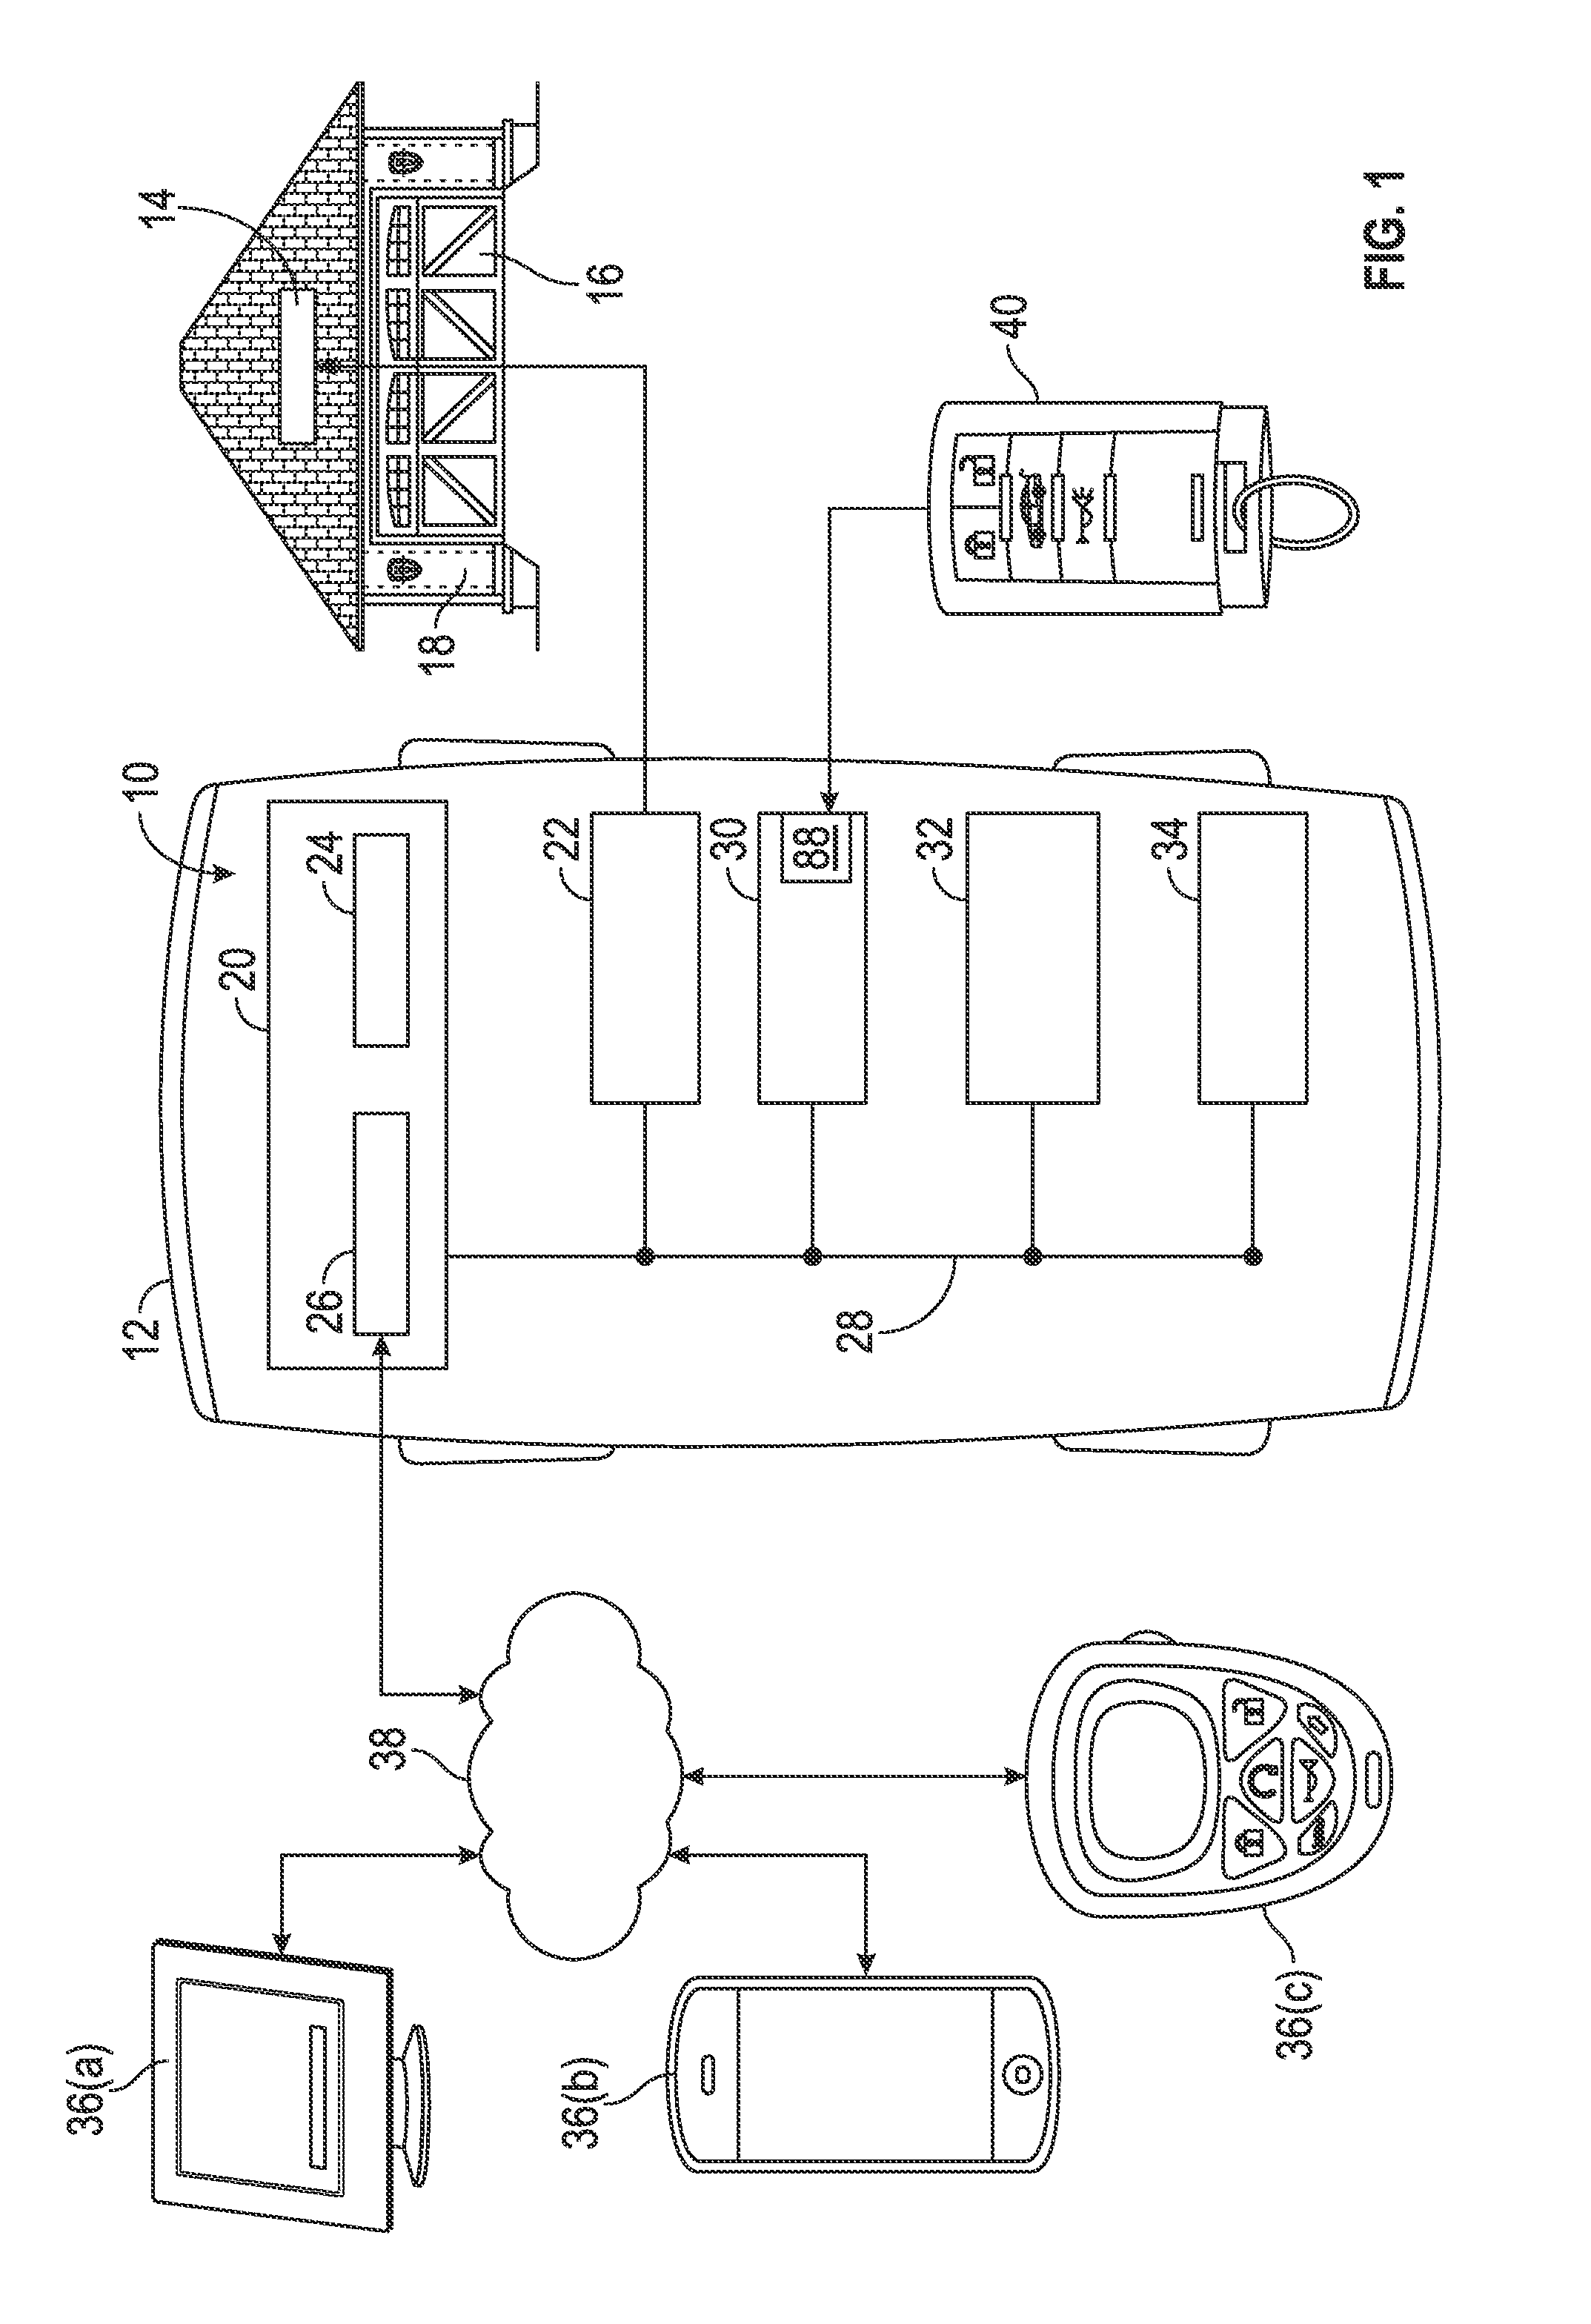 Methods, program products, and systems relating to vehicular garage door control systems